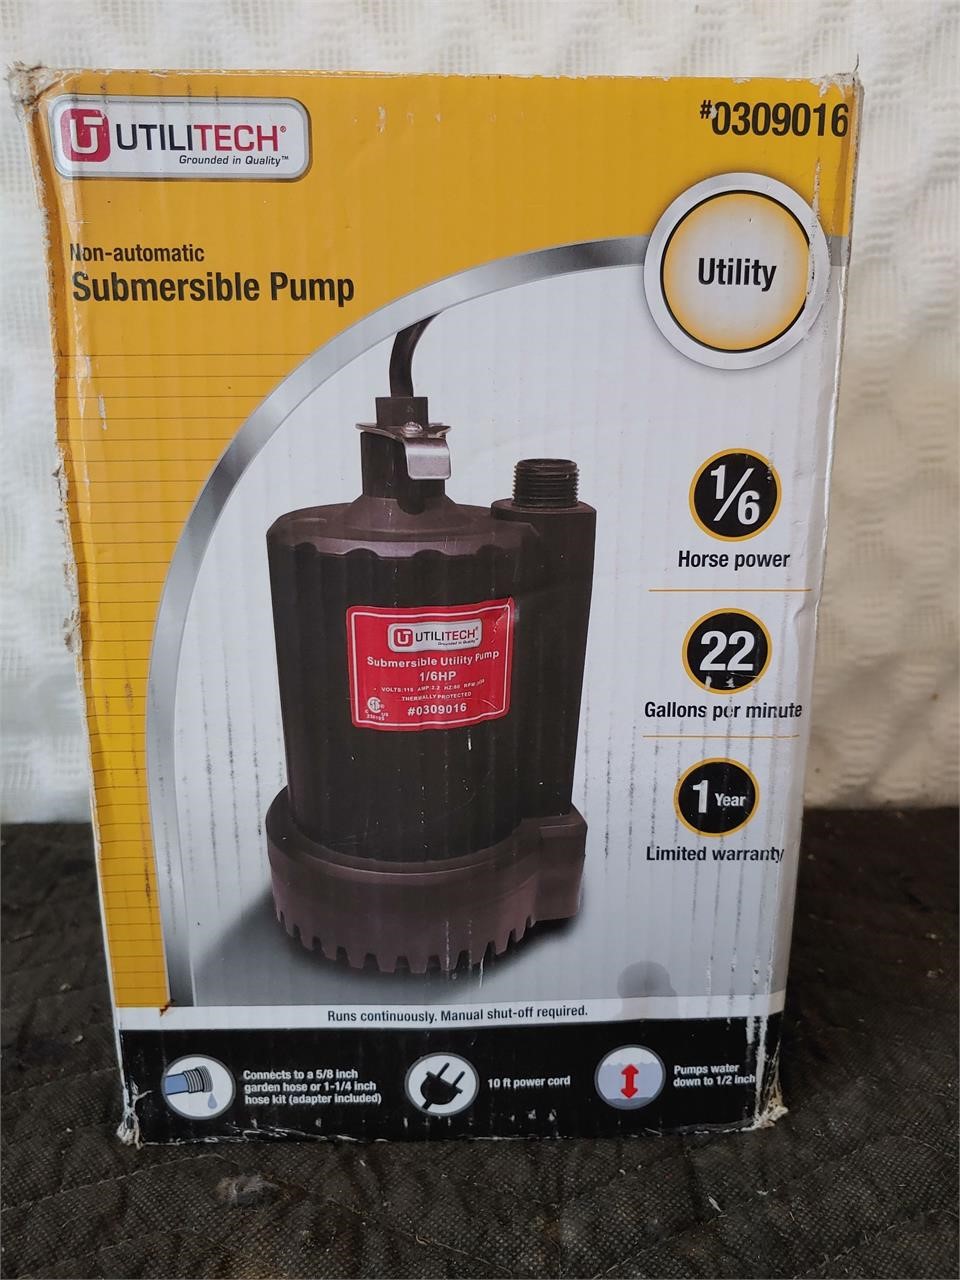 New in Box Submersible Pump 1,320 gallon/hr